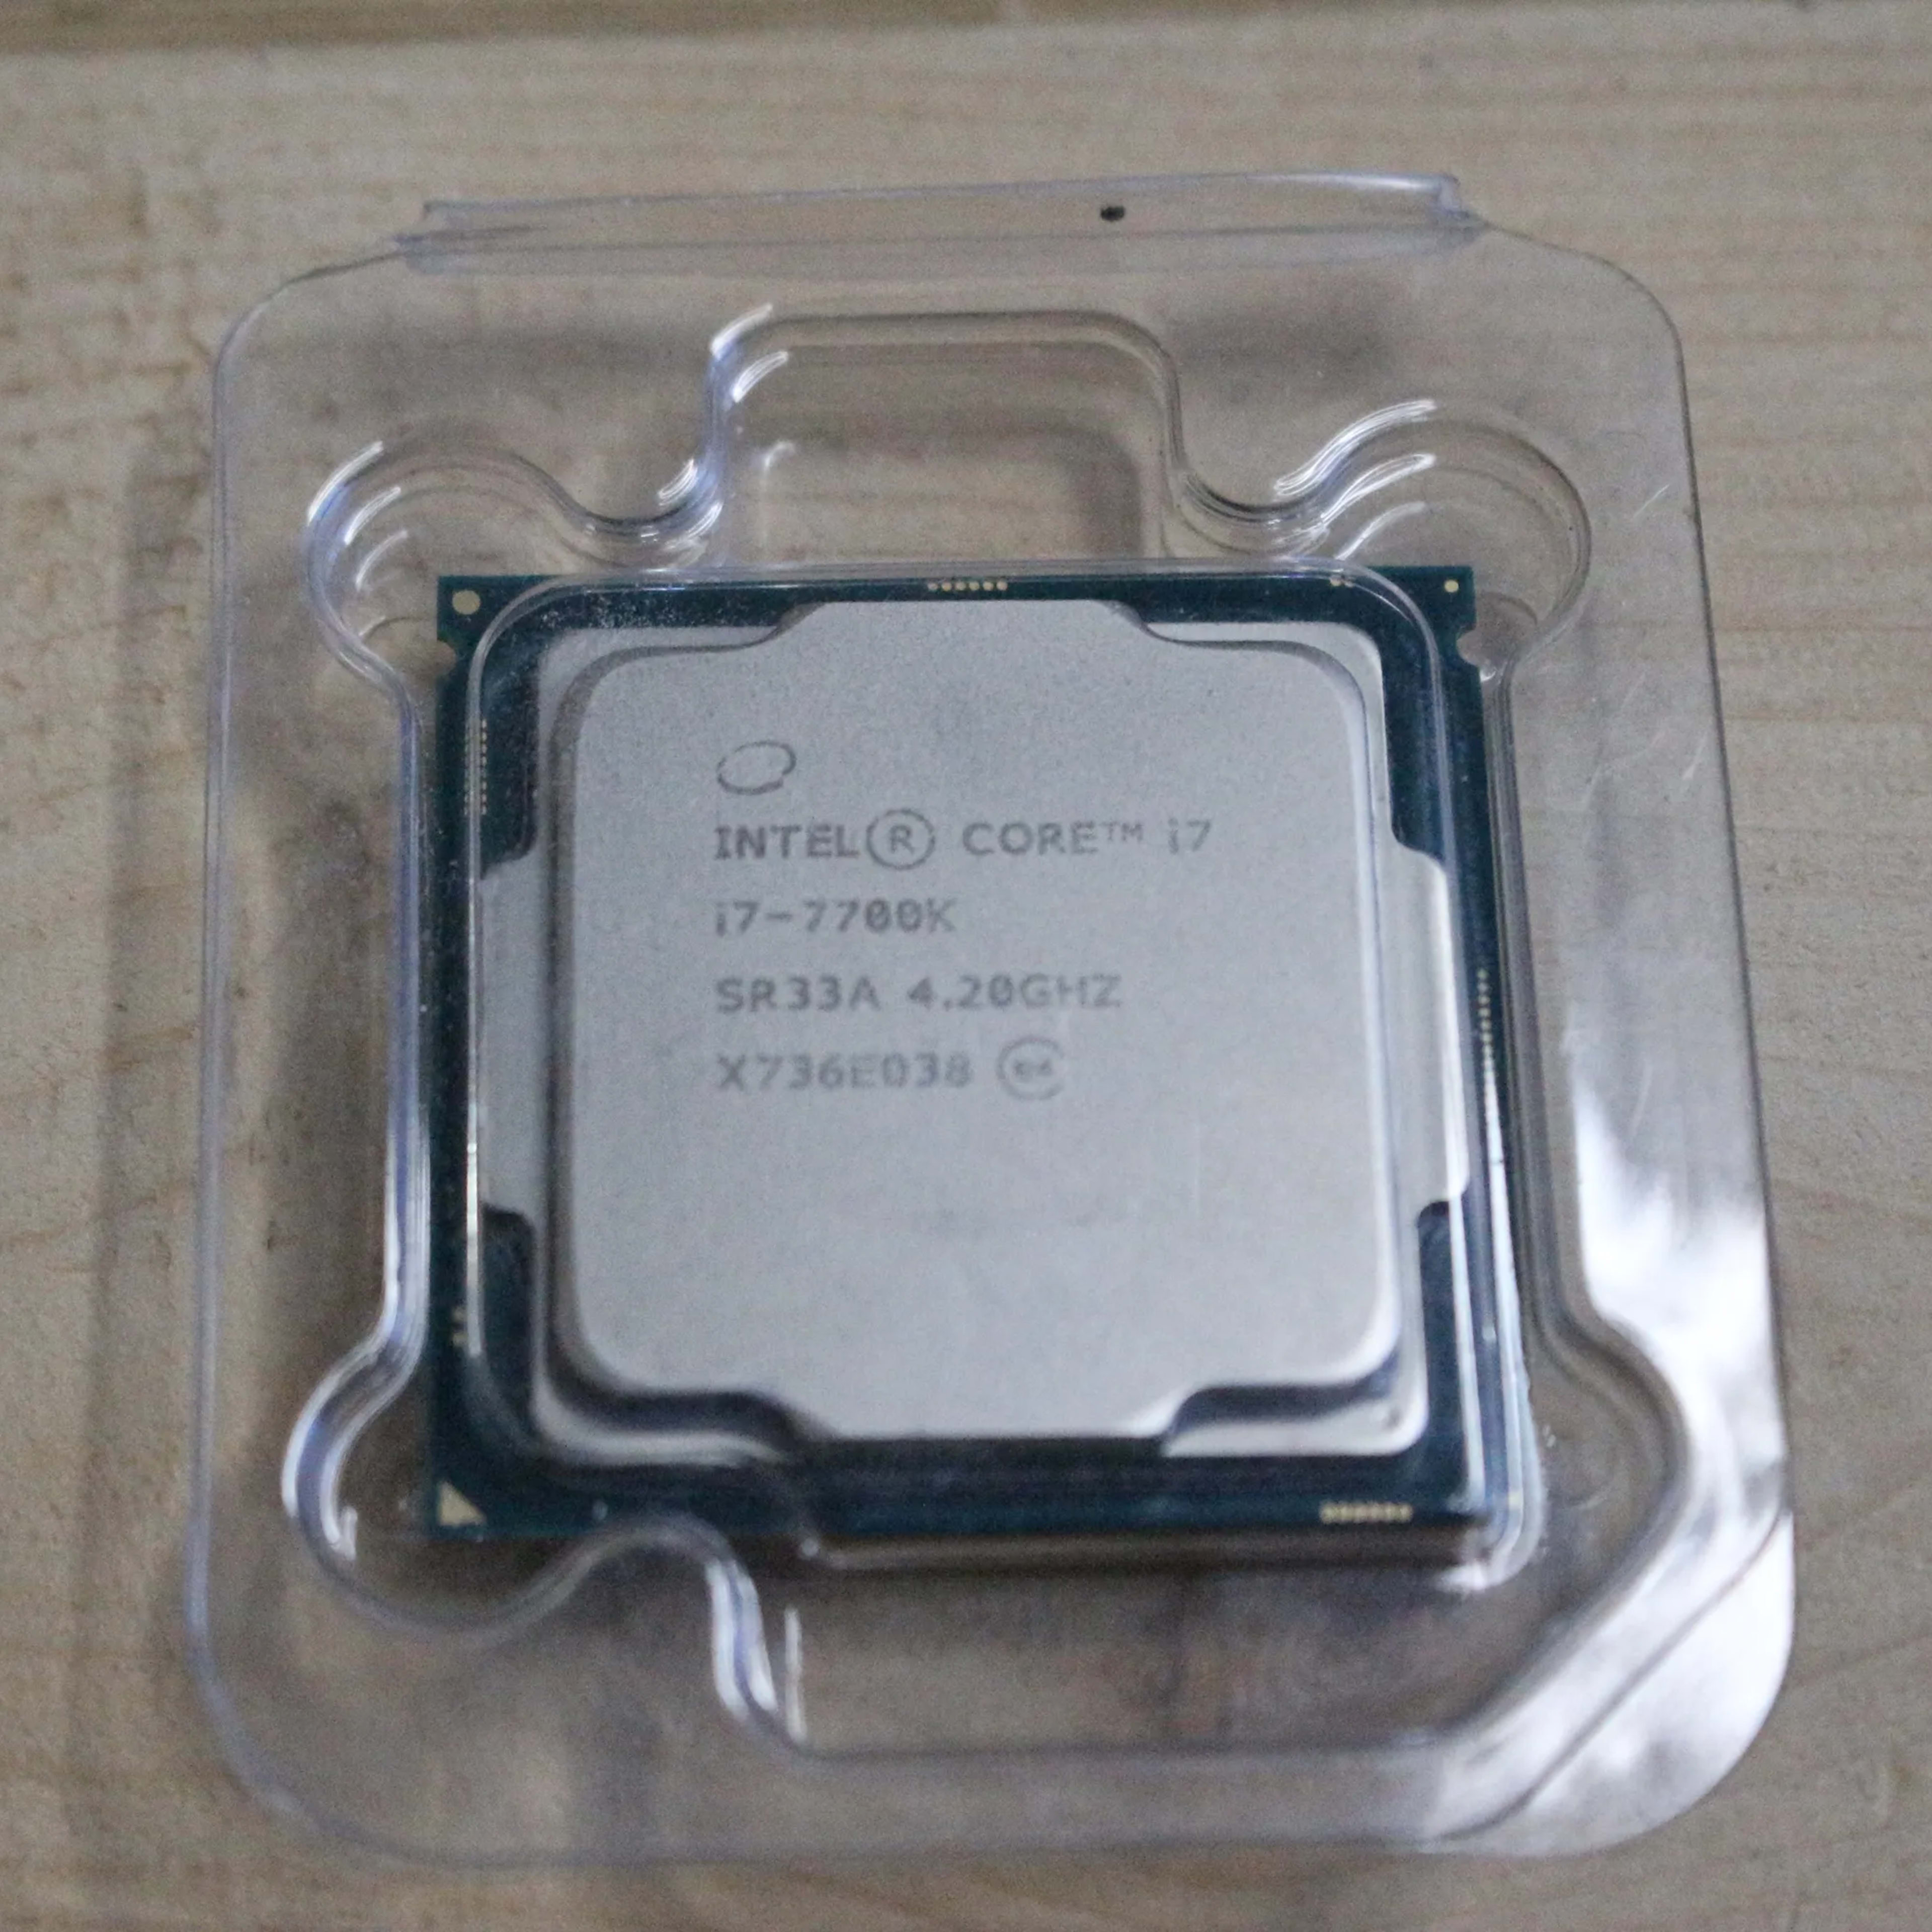 Intel Core i7-7700K | 4 Cores 8 Threads @4.20GHz